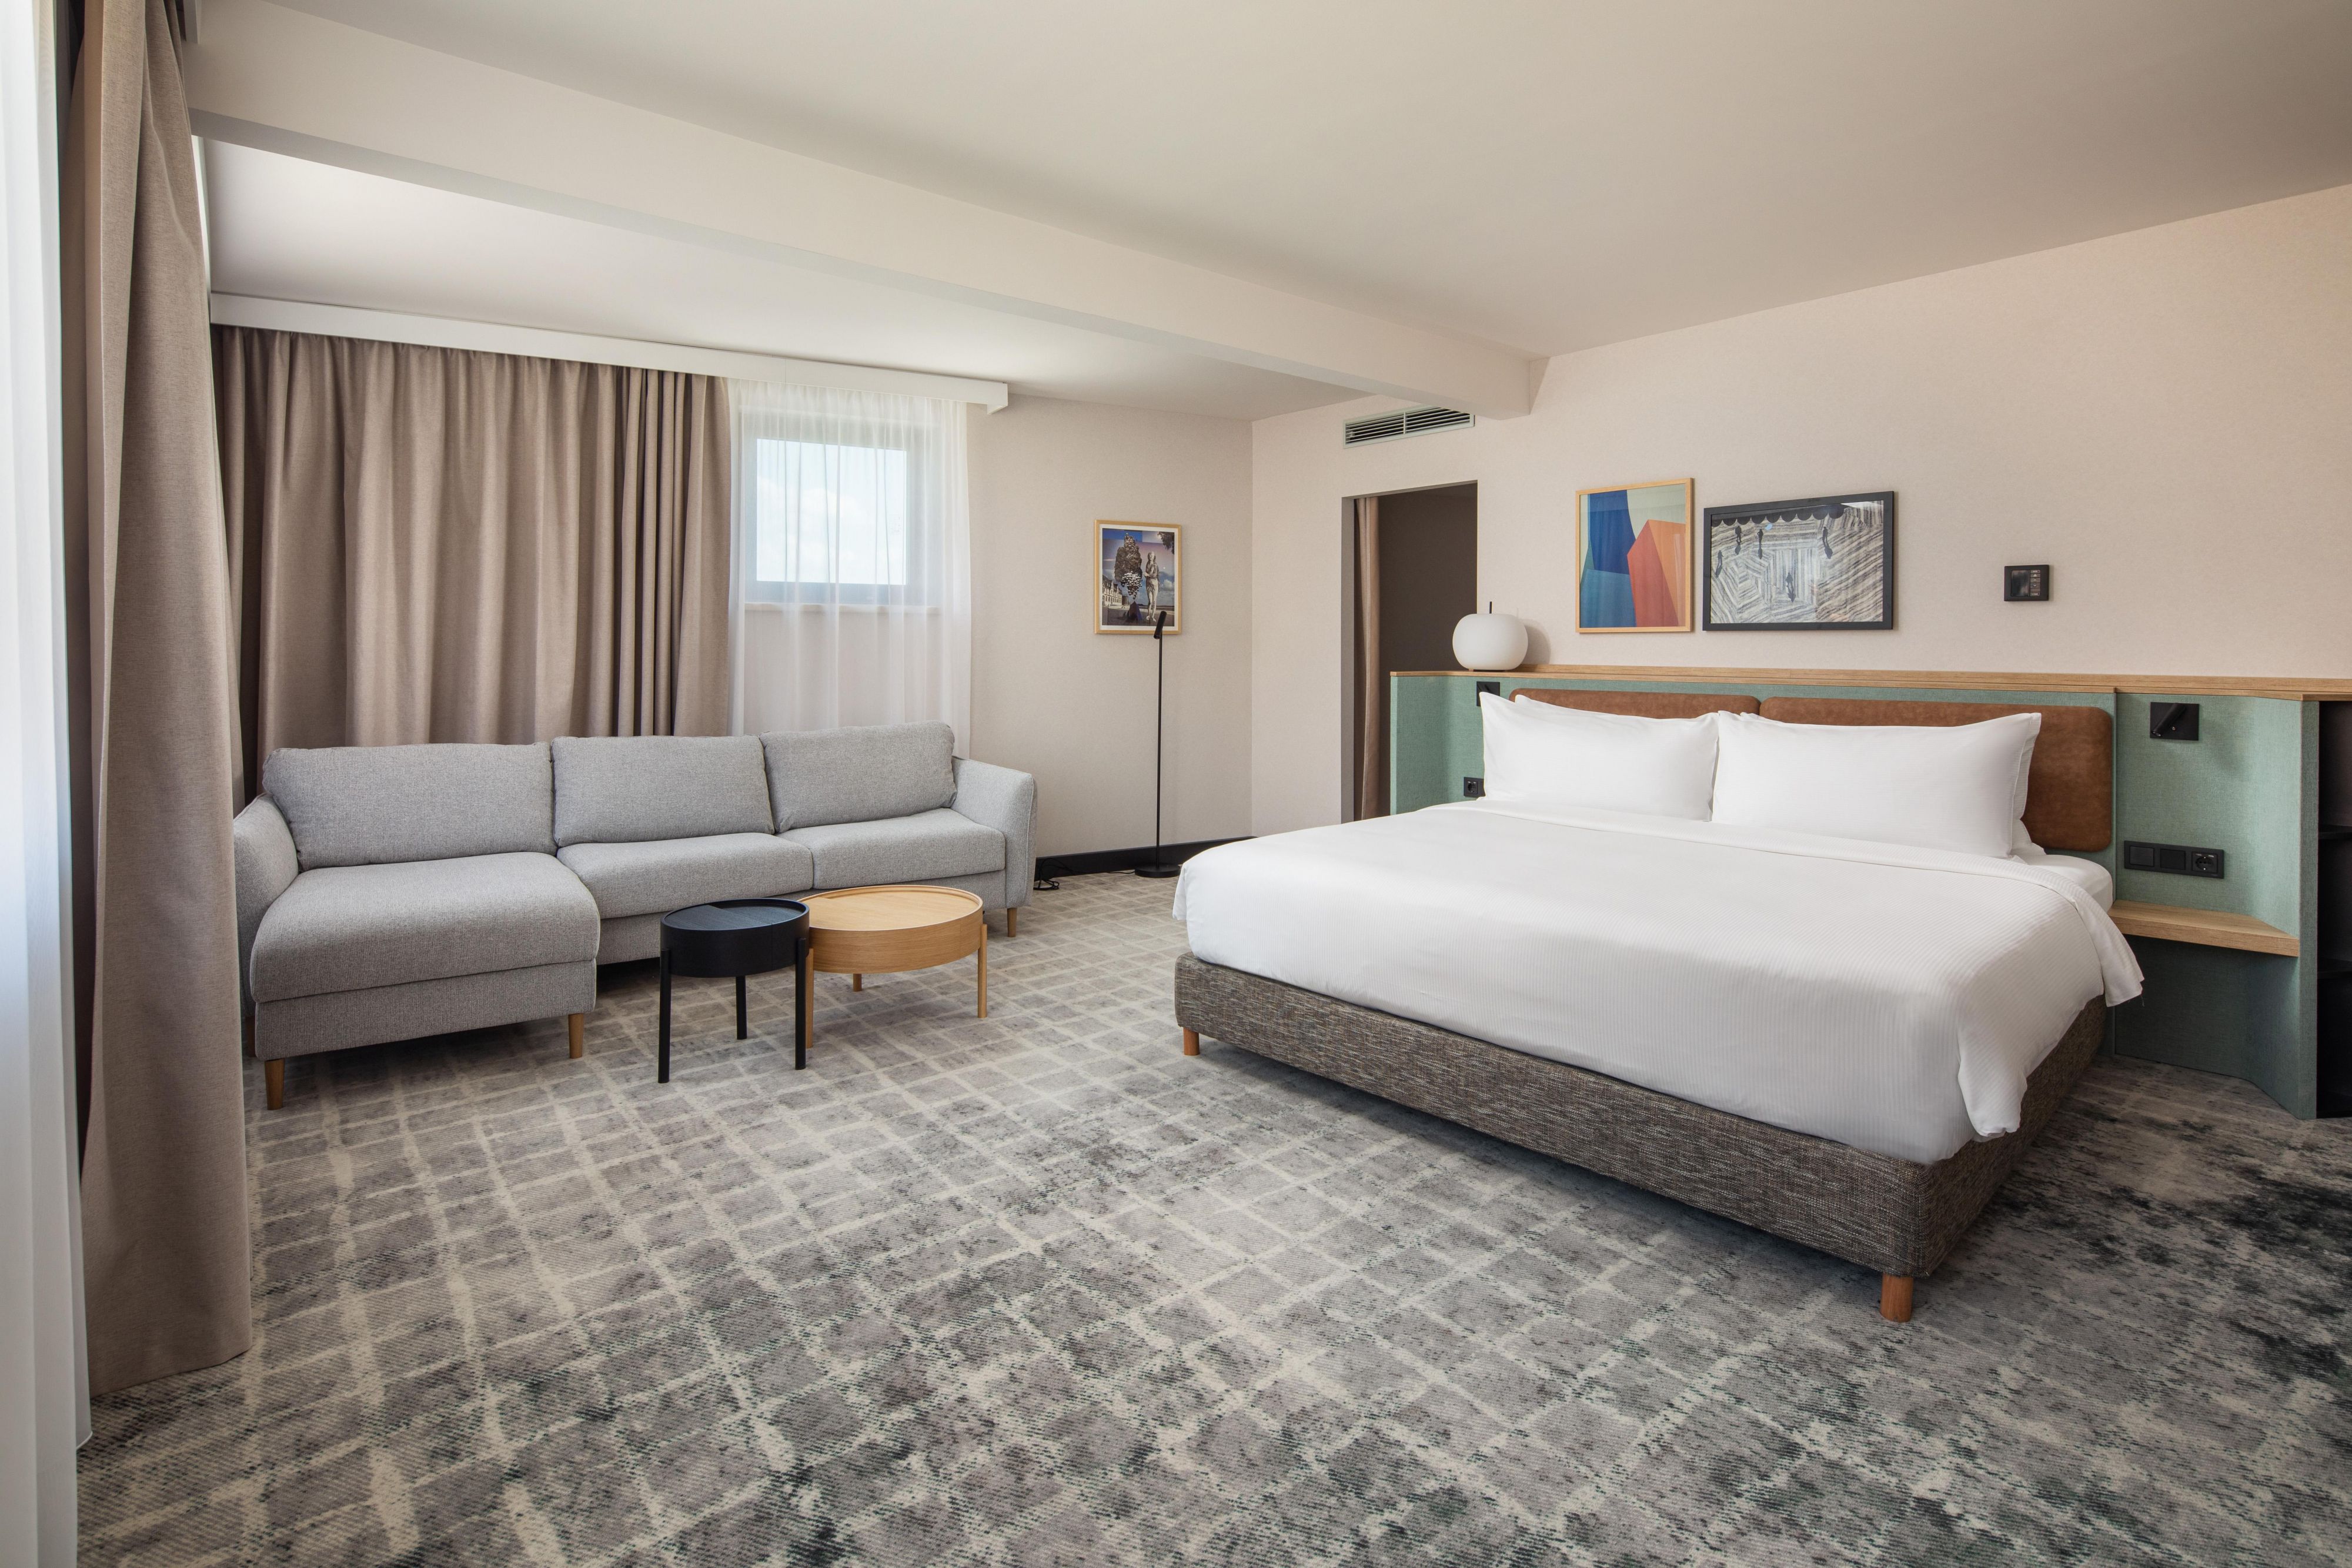 Make yourself at home in our spacious deluxe room